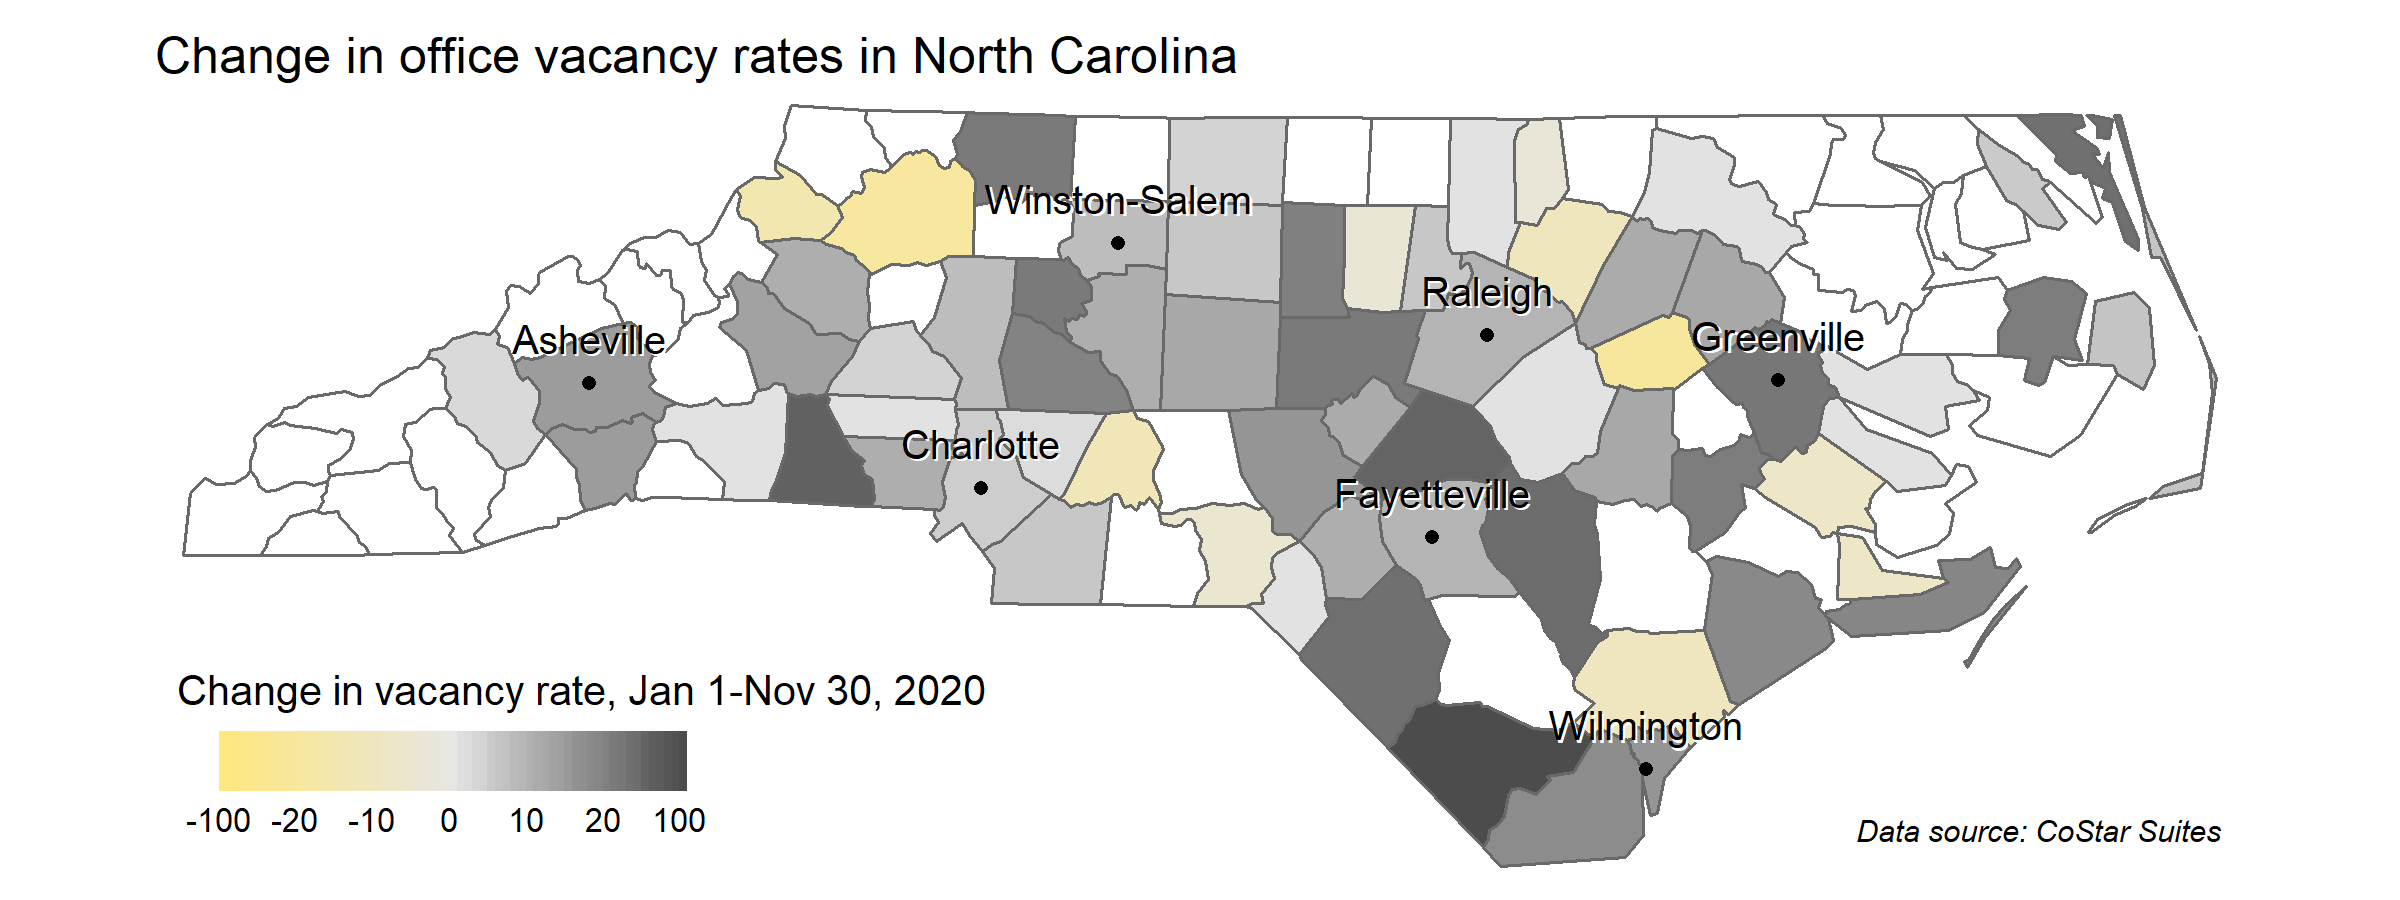 A map of North Carolina's counties showing the change in office vacancy rates for each county, with a few decreases represented in green and mostly increases represented in gray.